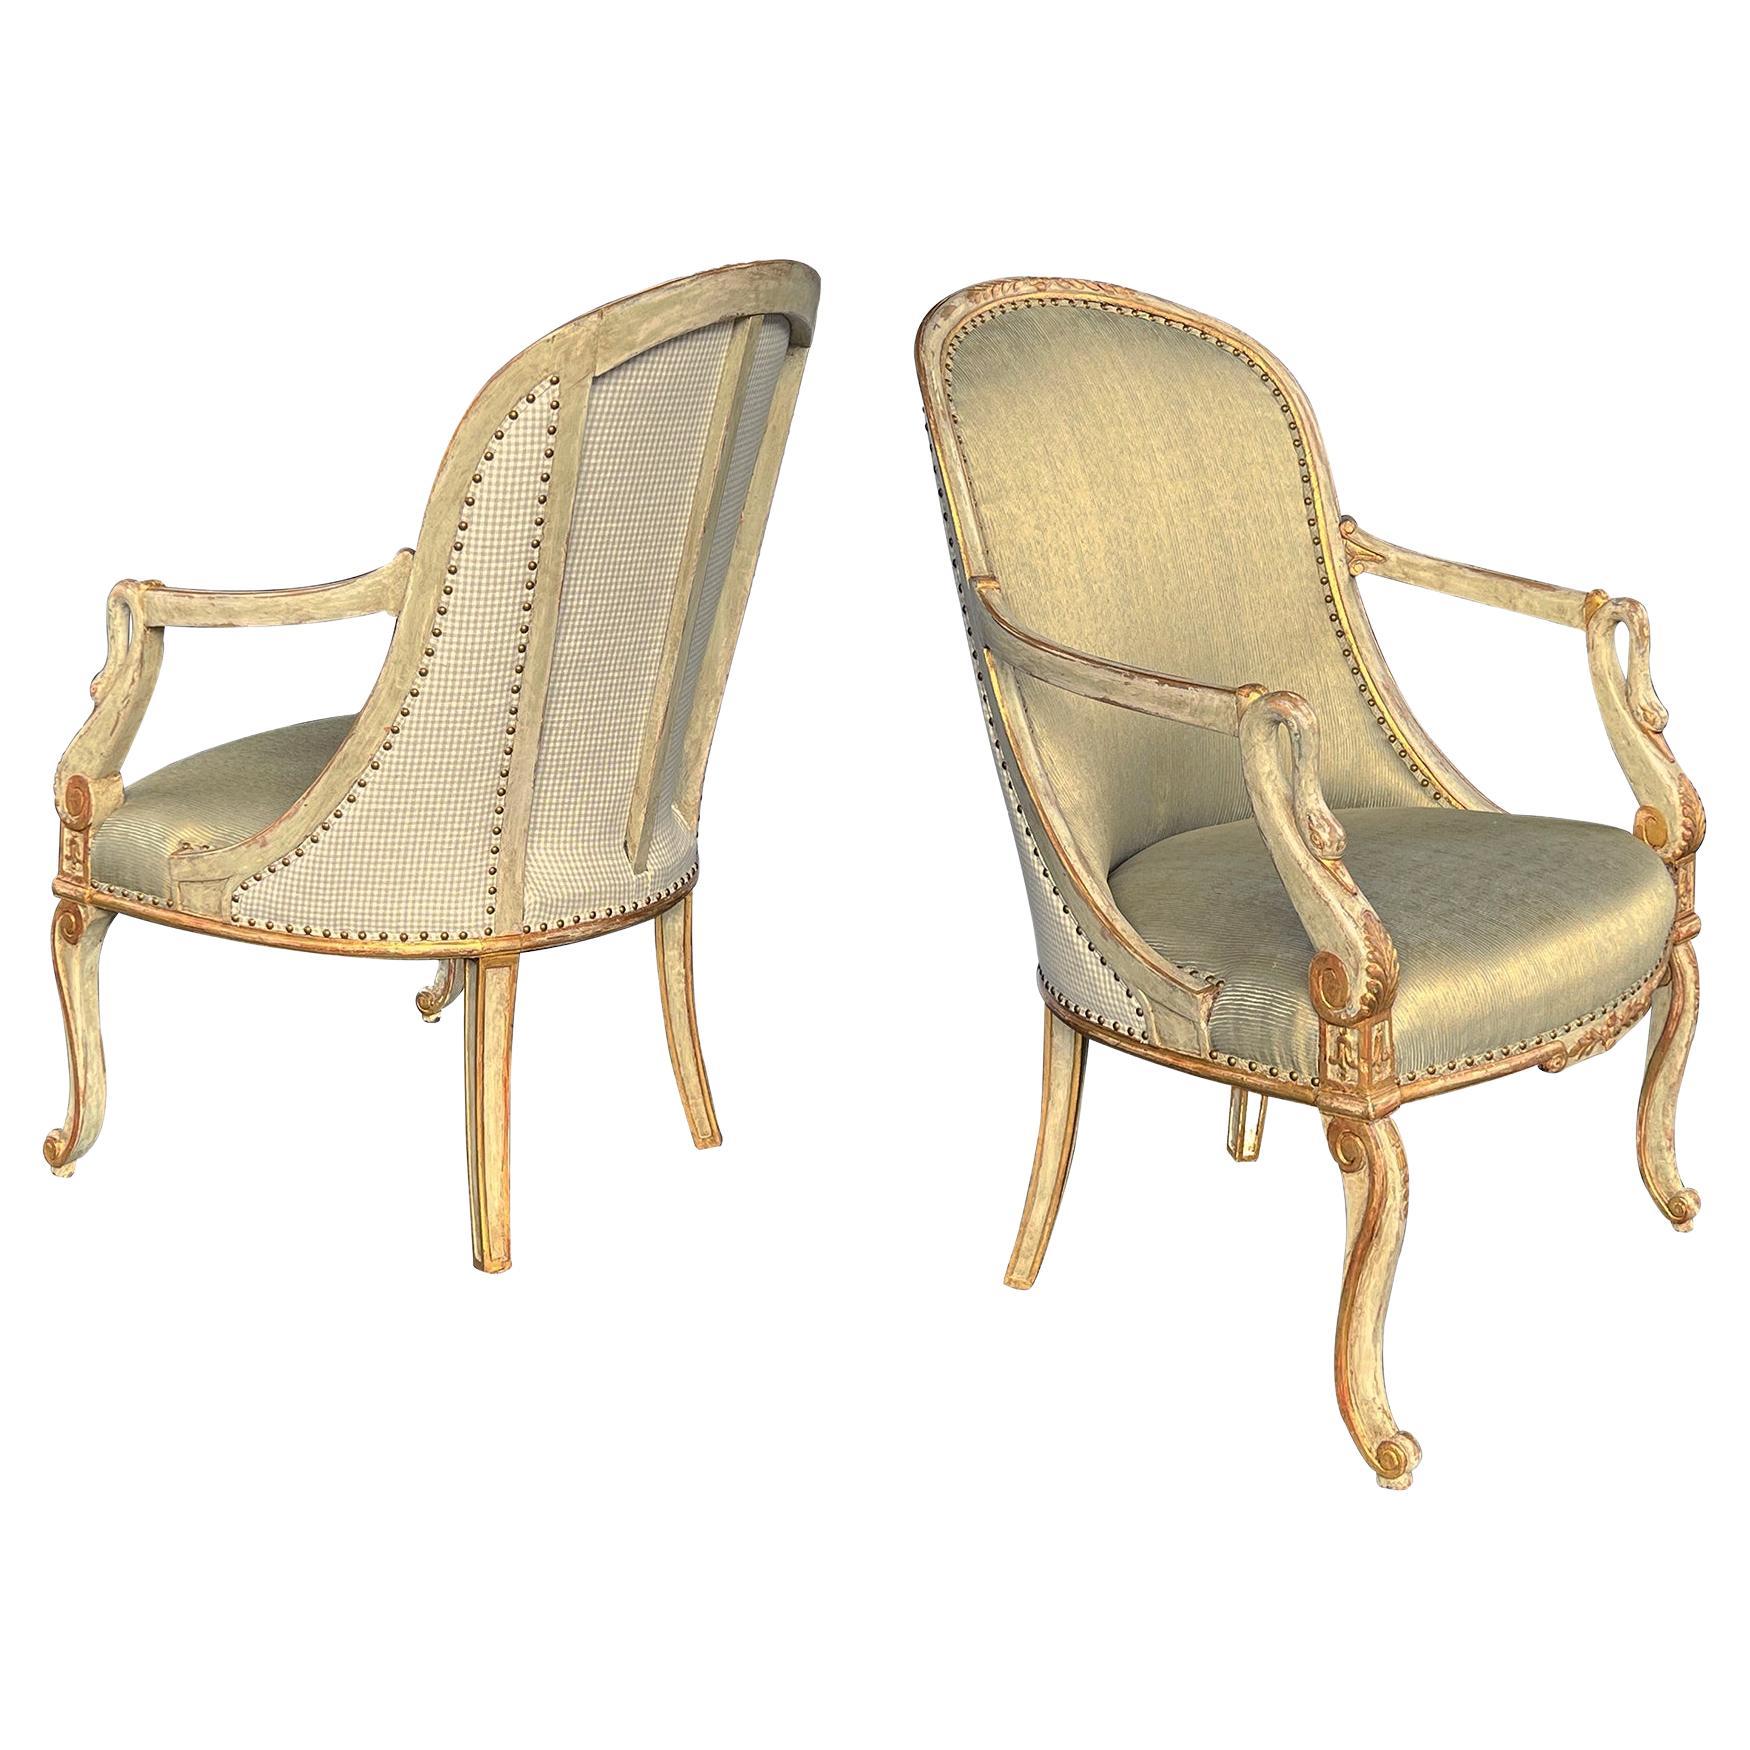 An Elegant Pair Italian Empire Pale-green Painted and Parcel-gilt Armchairs For Sale